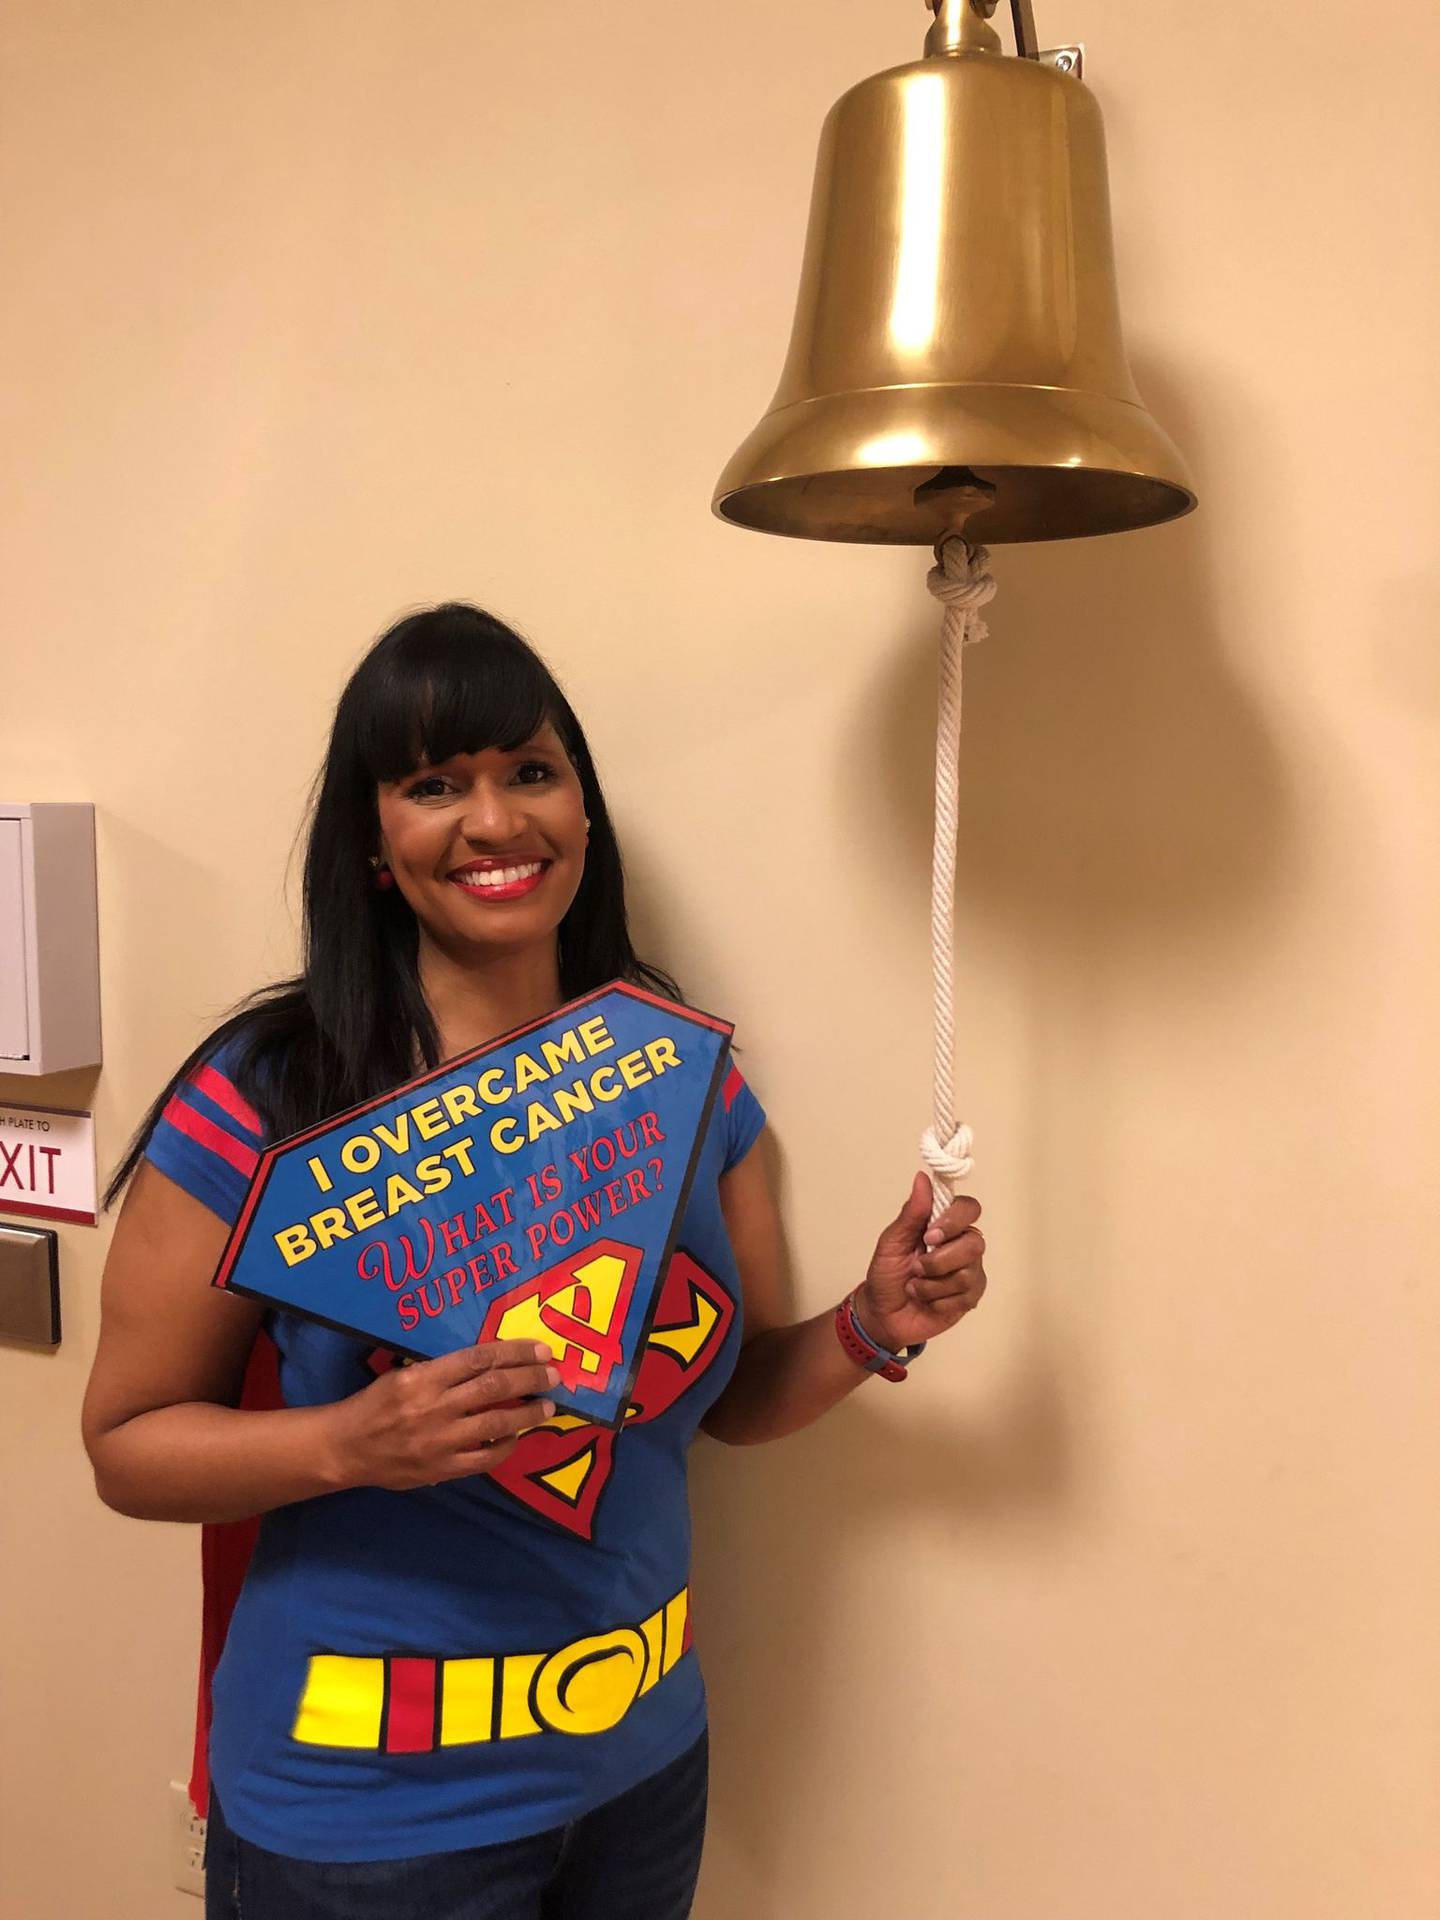 Ericka Glorious Moore of Tinley Park wore a Superman shirt and cape for her final radiation treatment at the UChicago Medicine Comprehensive Cancer Center at Silver Cross Hospital on Friday, May 13, 2022, Moore rang the bell to symbolize the end of her cancer journey.